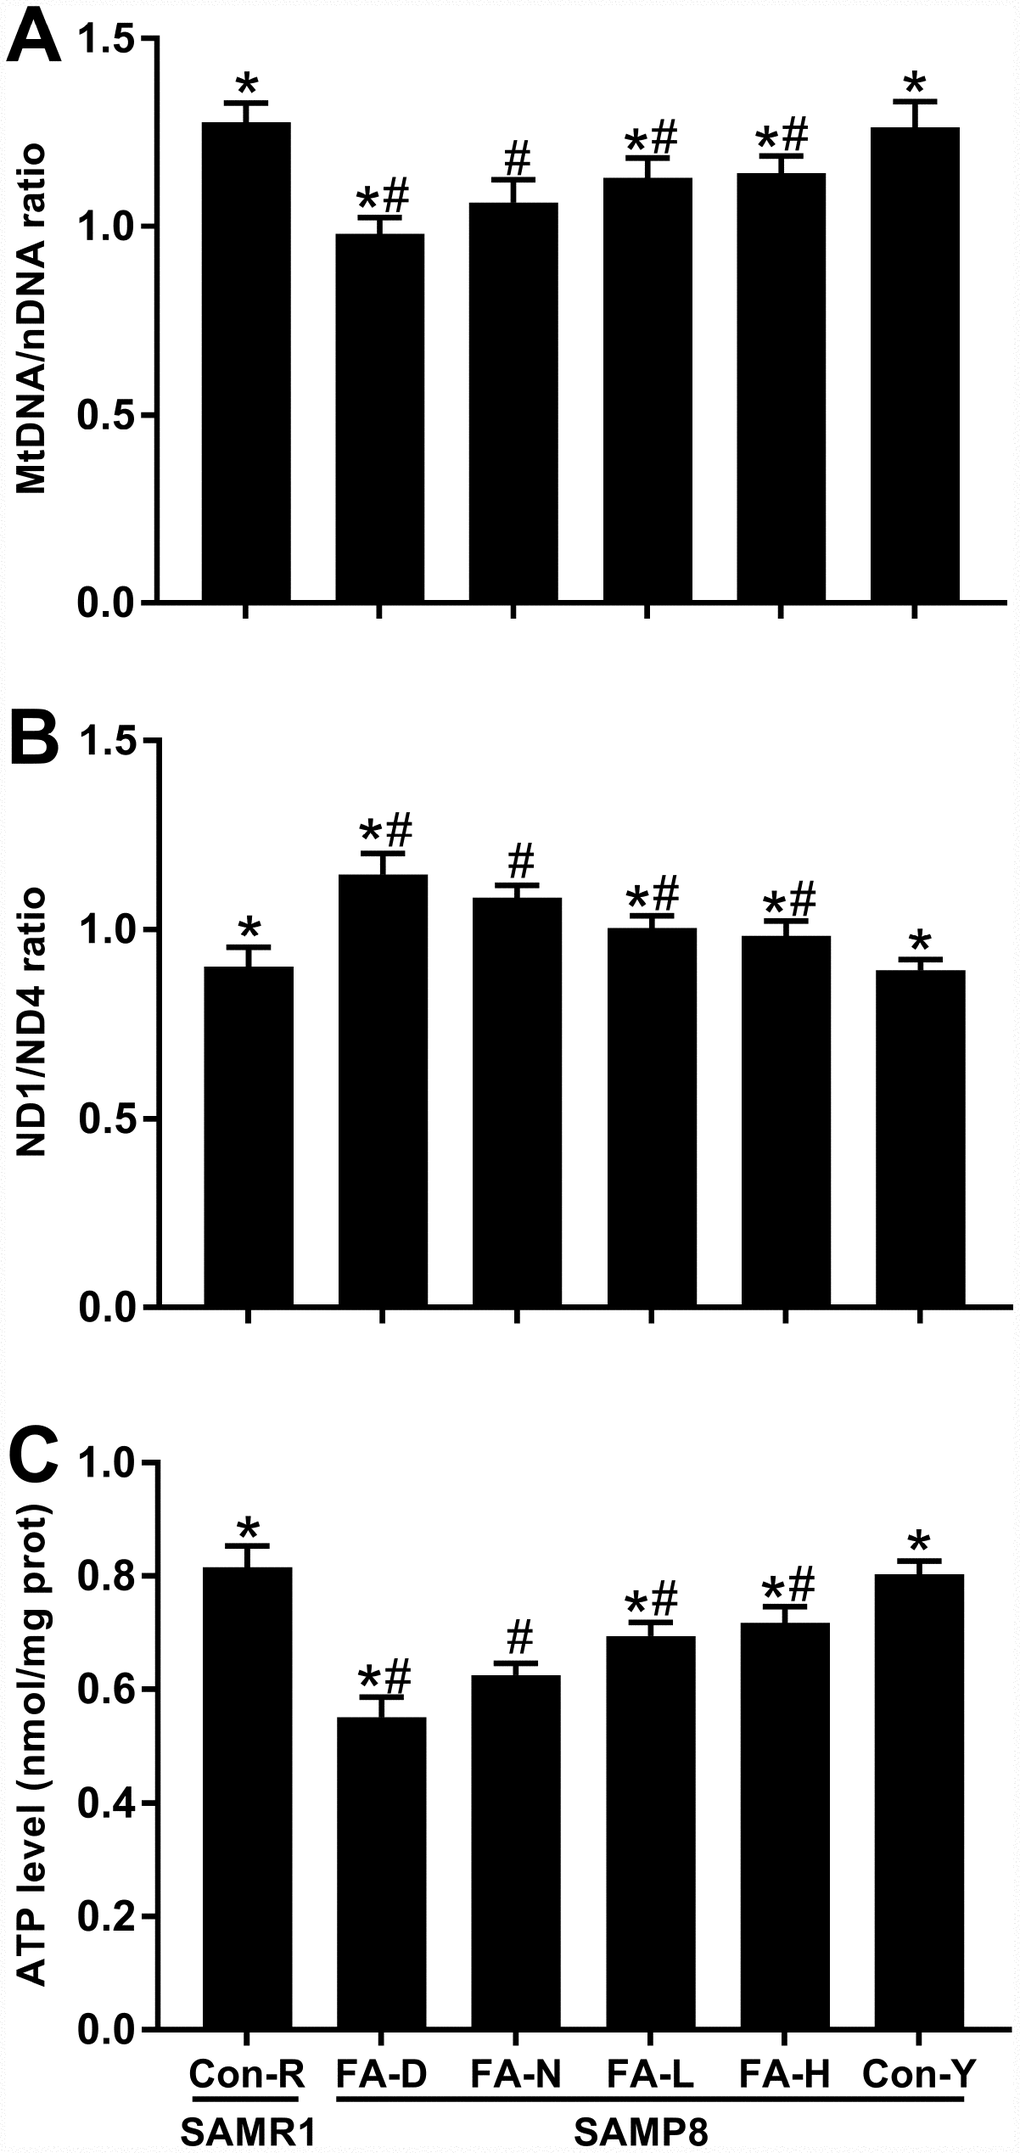 FA supplementation improved mitochondrial biogenesis and function in brain of SAMP8 mice. Mice were assigned to treatment groups as described in Figure 1. (A) Relative mitochondrial DNA copy number indicated by mtDNA/nDNA ratio [F(5,54) = 43.946, PB) Mitochondrial DNA deletions indicated by ND1/ND4 ratio [F(5,54) = 59.644, PC) Mitochondrial function indicated by ATP level [F(5,54) = 123.771, PP#P